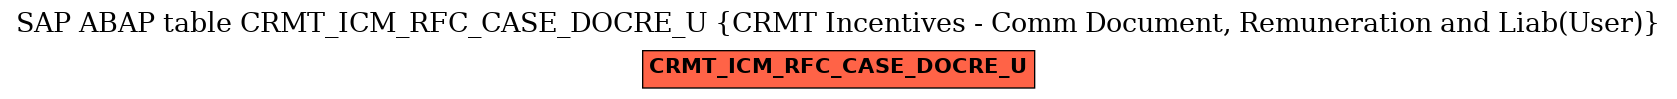 E-R Diagram for table CRMT_ICM_RFC_CASE_DOCRE_U (CRMT Incentives - Comm Document, Remuneration and Liab(User))